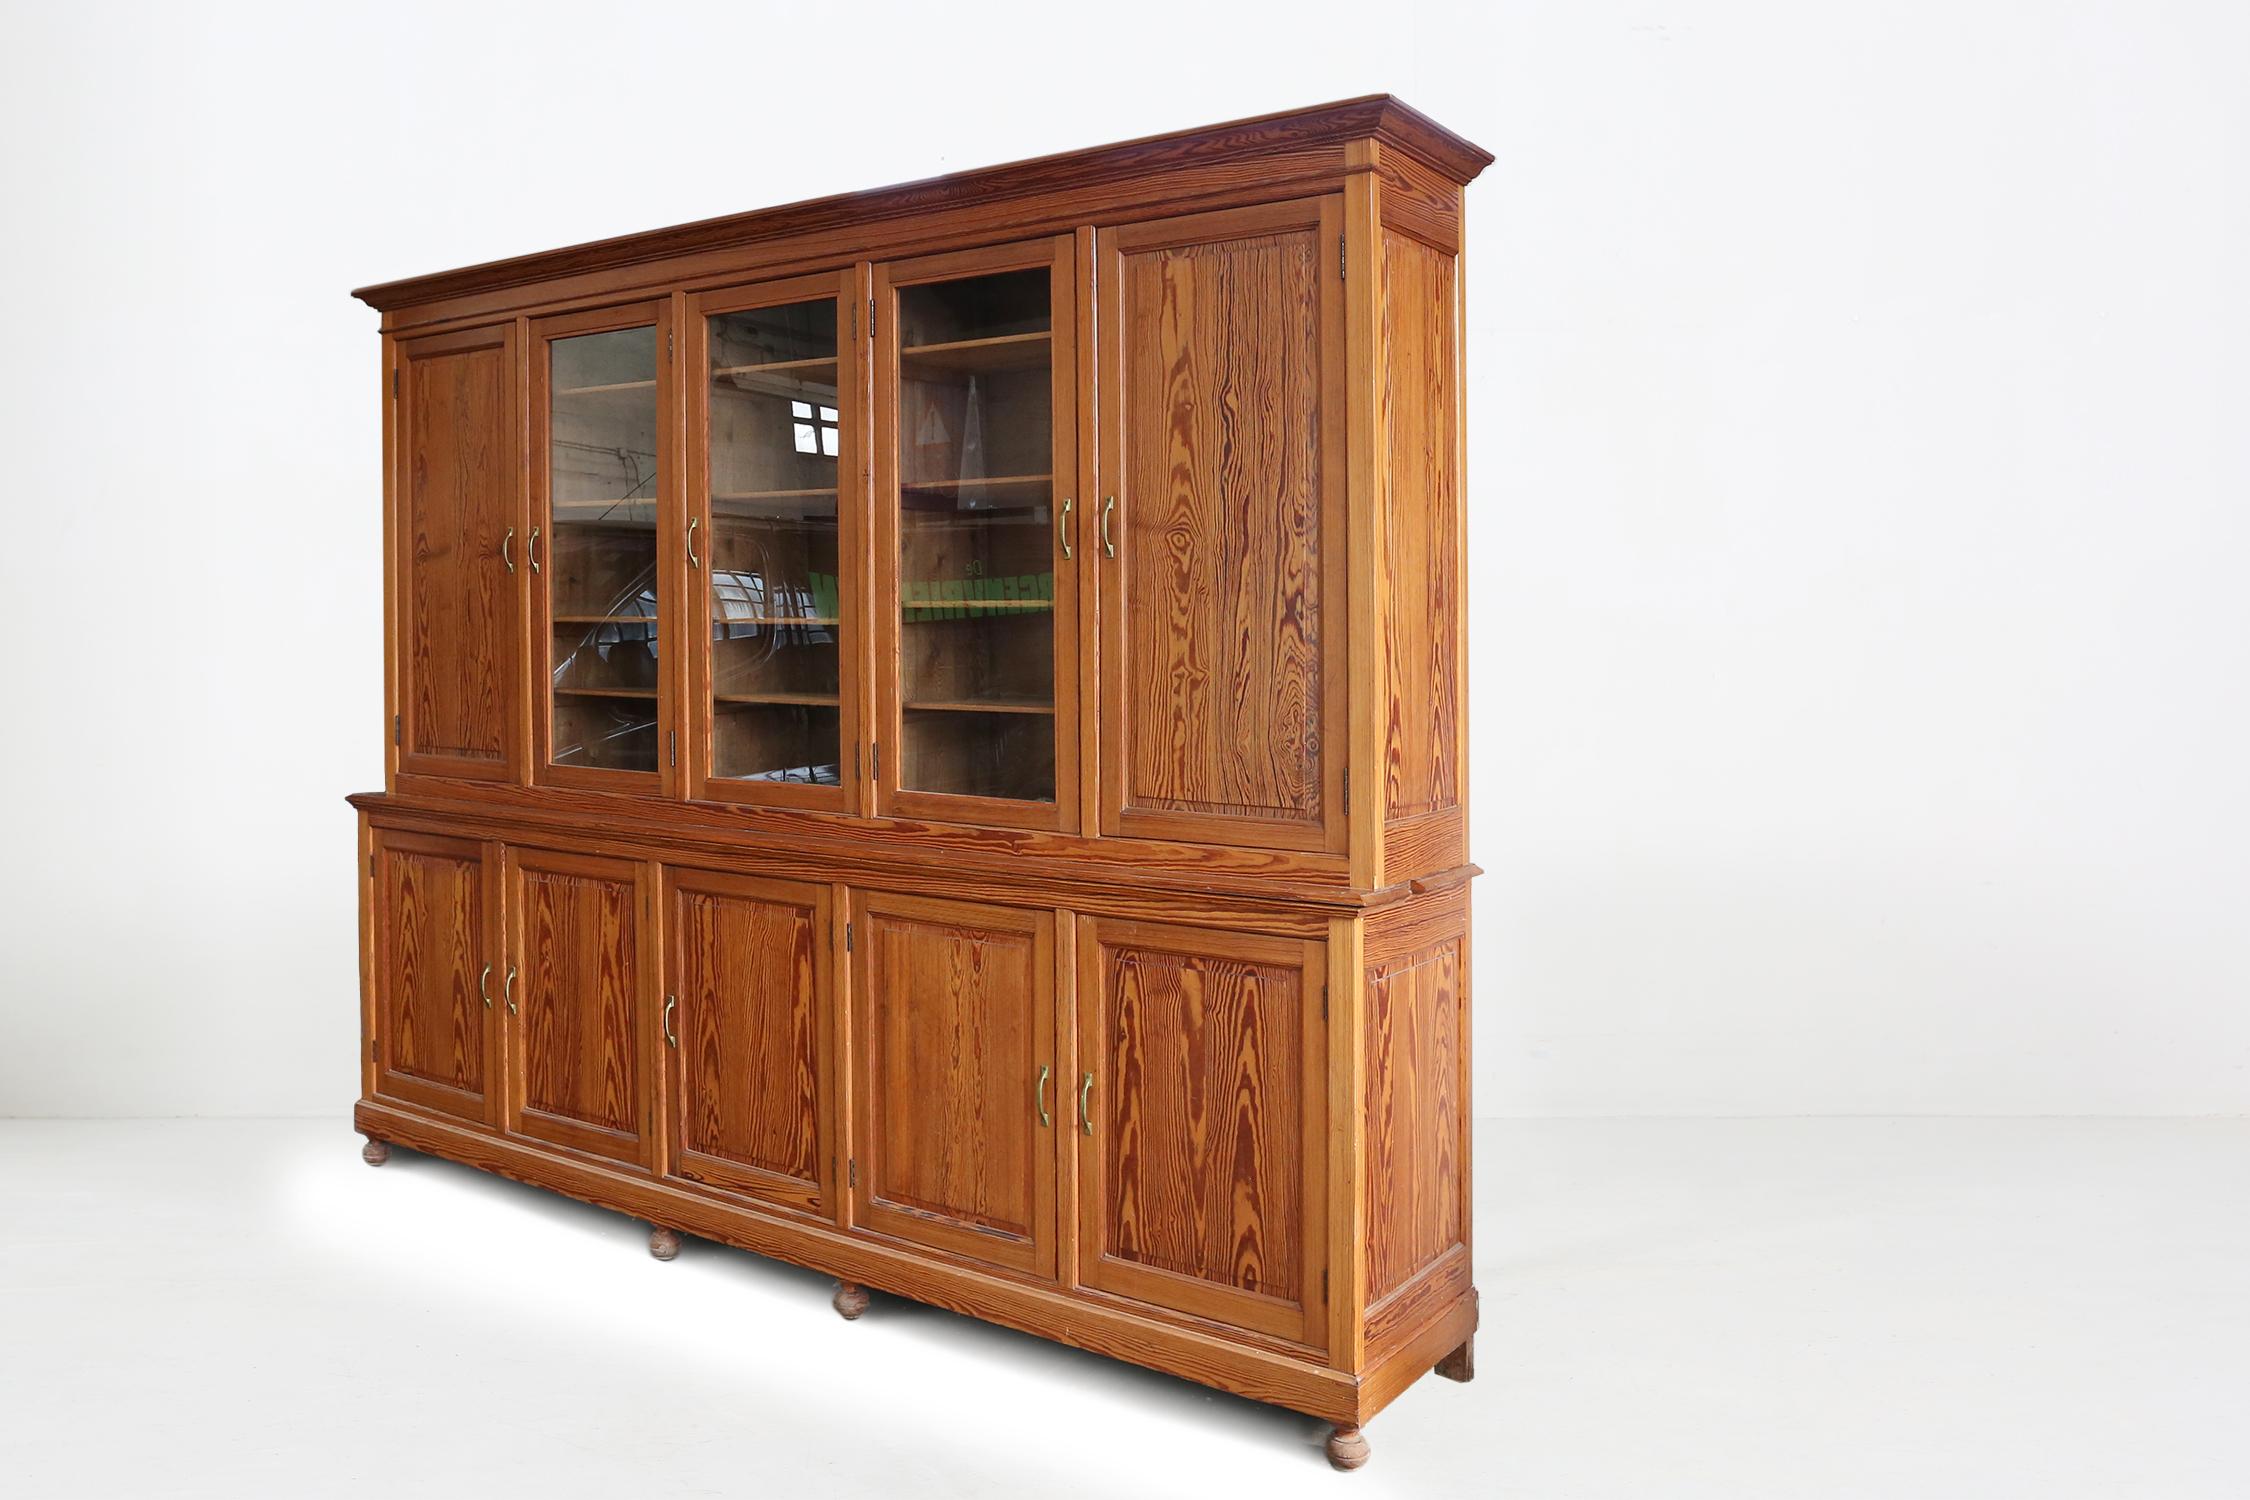 Large French monastery bookcase Ca.1870
The three large glass doors in the middle of the bookcase can be used as a display.
The beautiful wood structure of the pine wood provides a warm appearance.
This bookcase is finished with beautiful copper